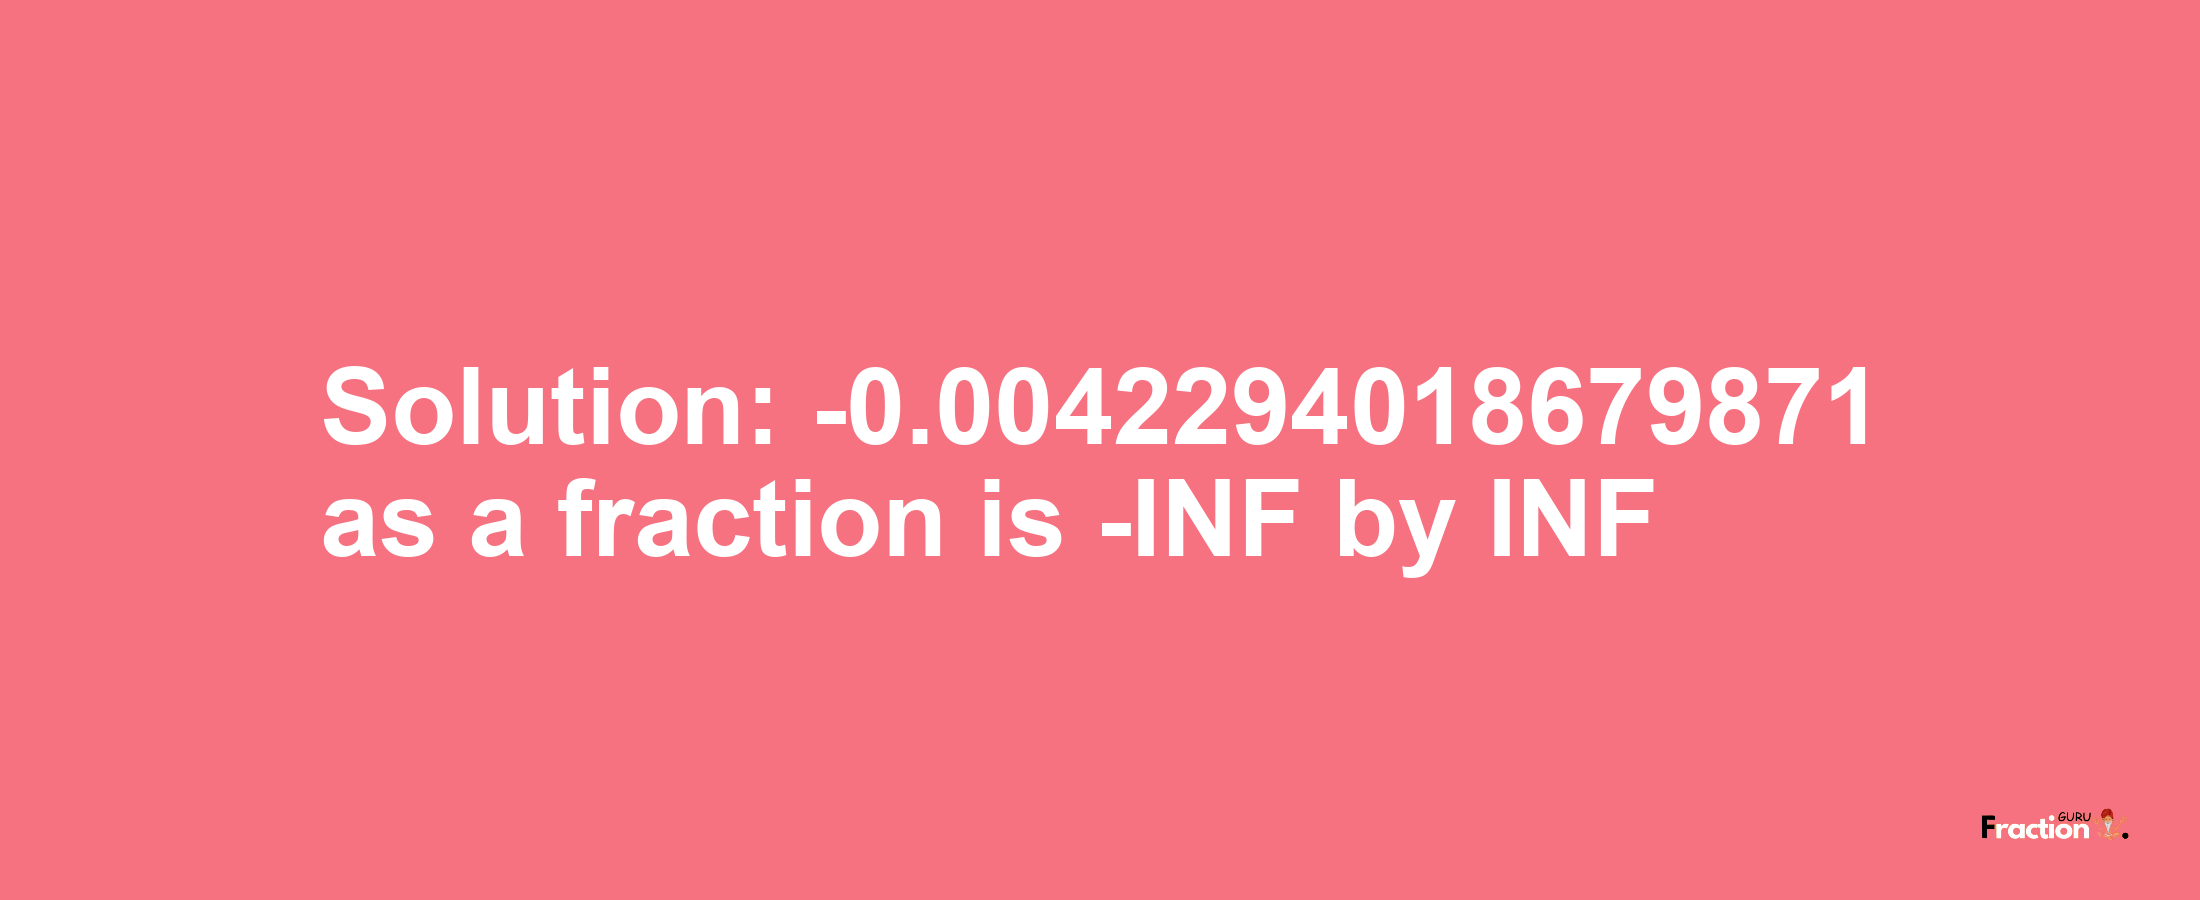 Solution:-0.0042294018679871 as a fraction is -INF/INF